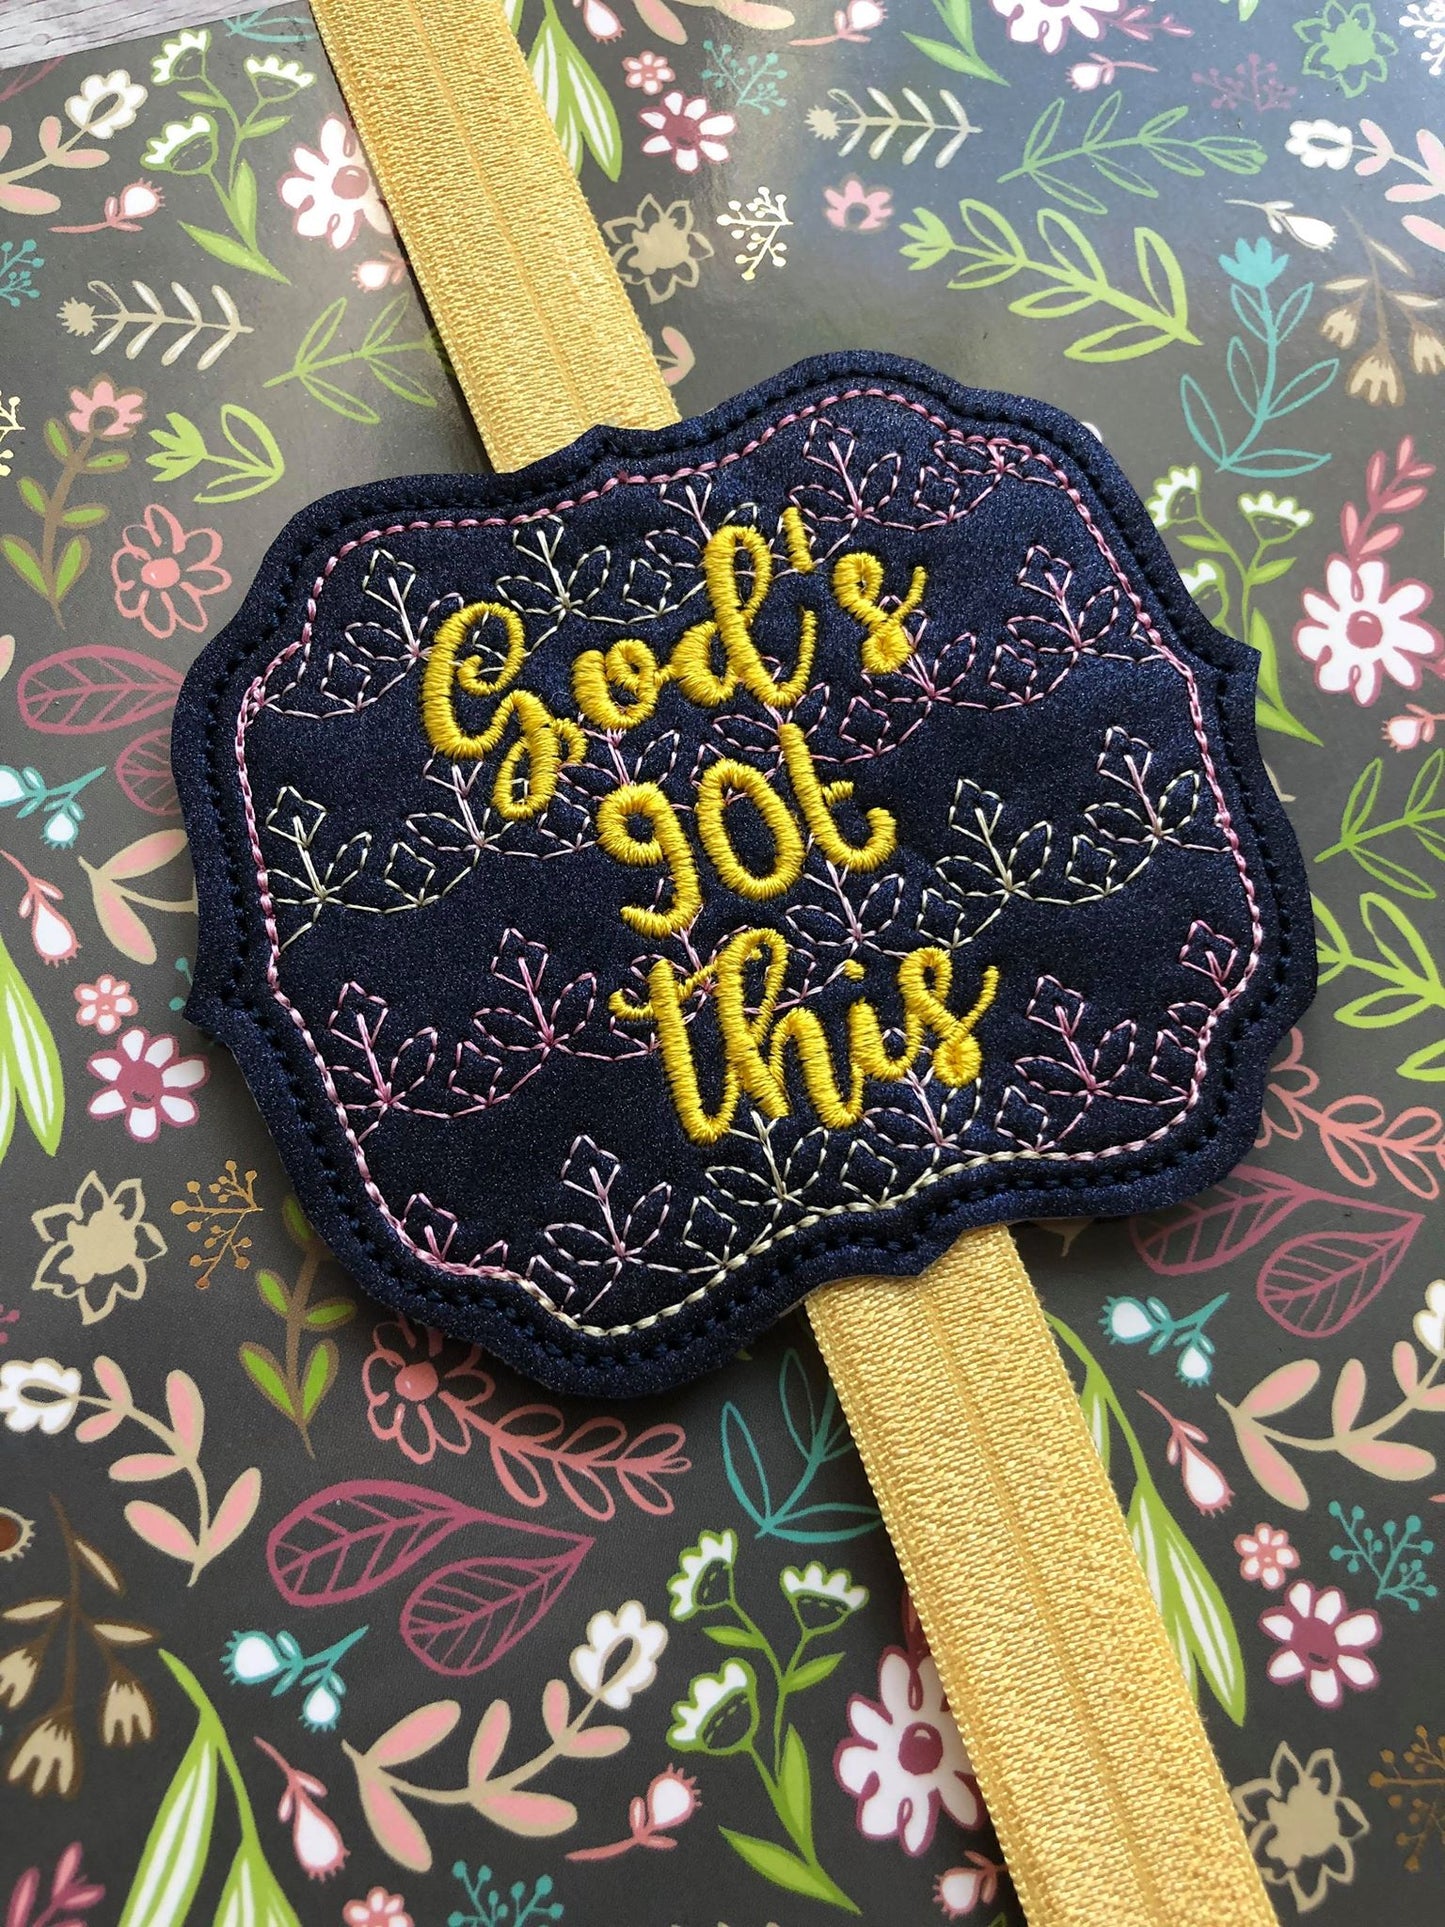 Gods got this Book Band - Digital Embroidery Design